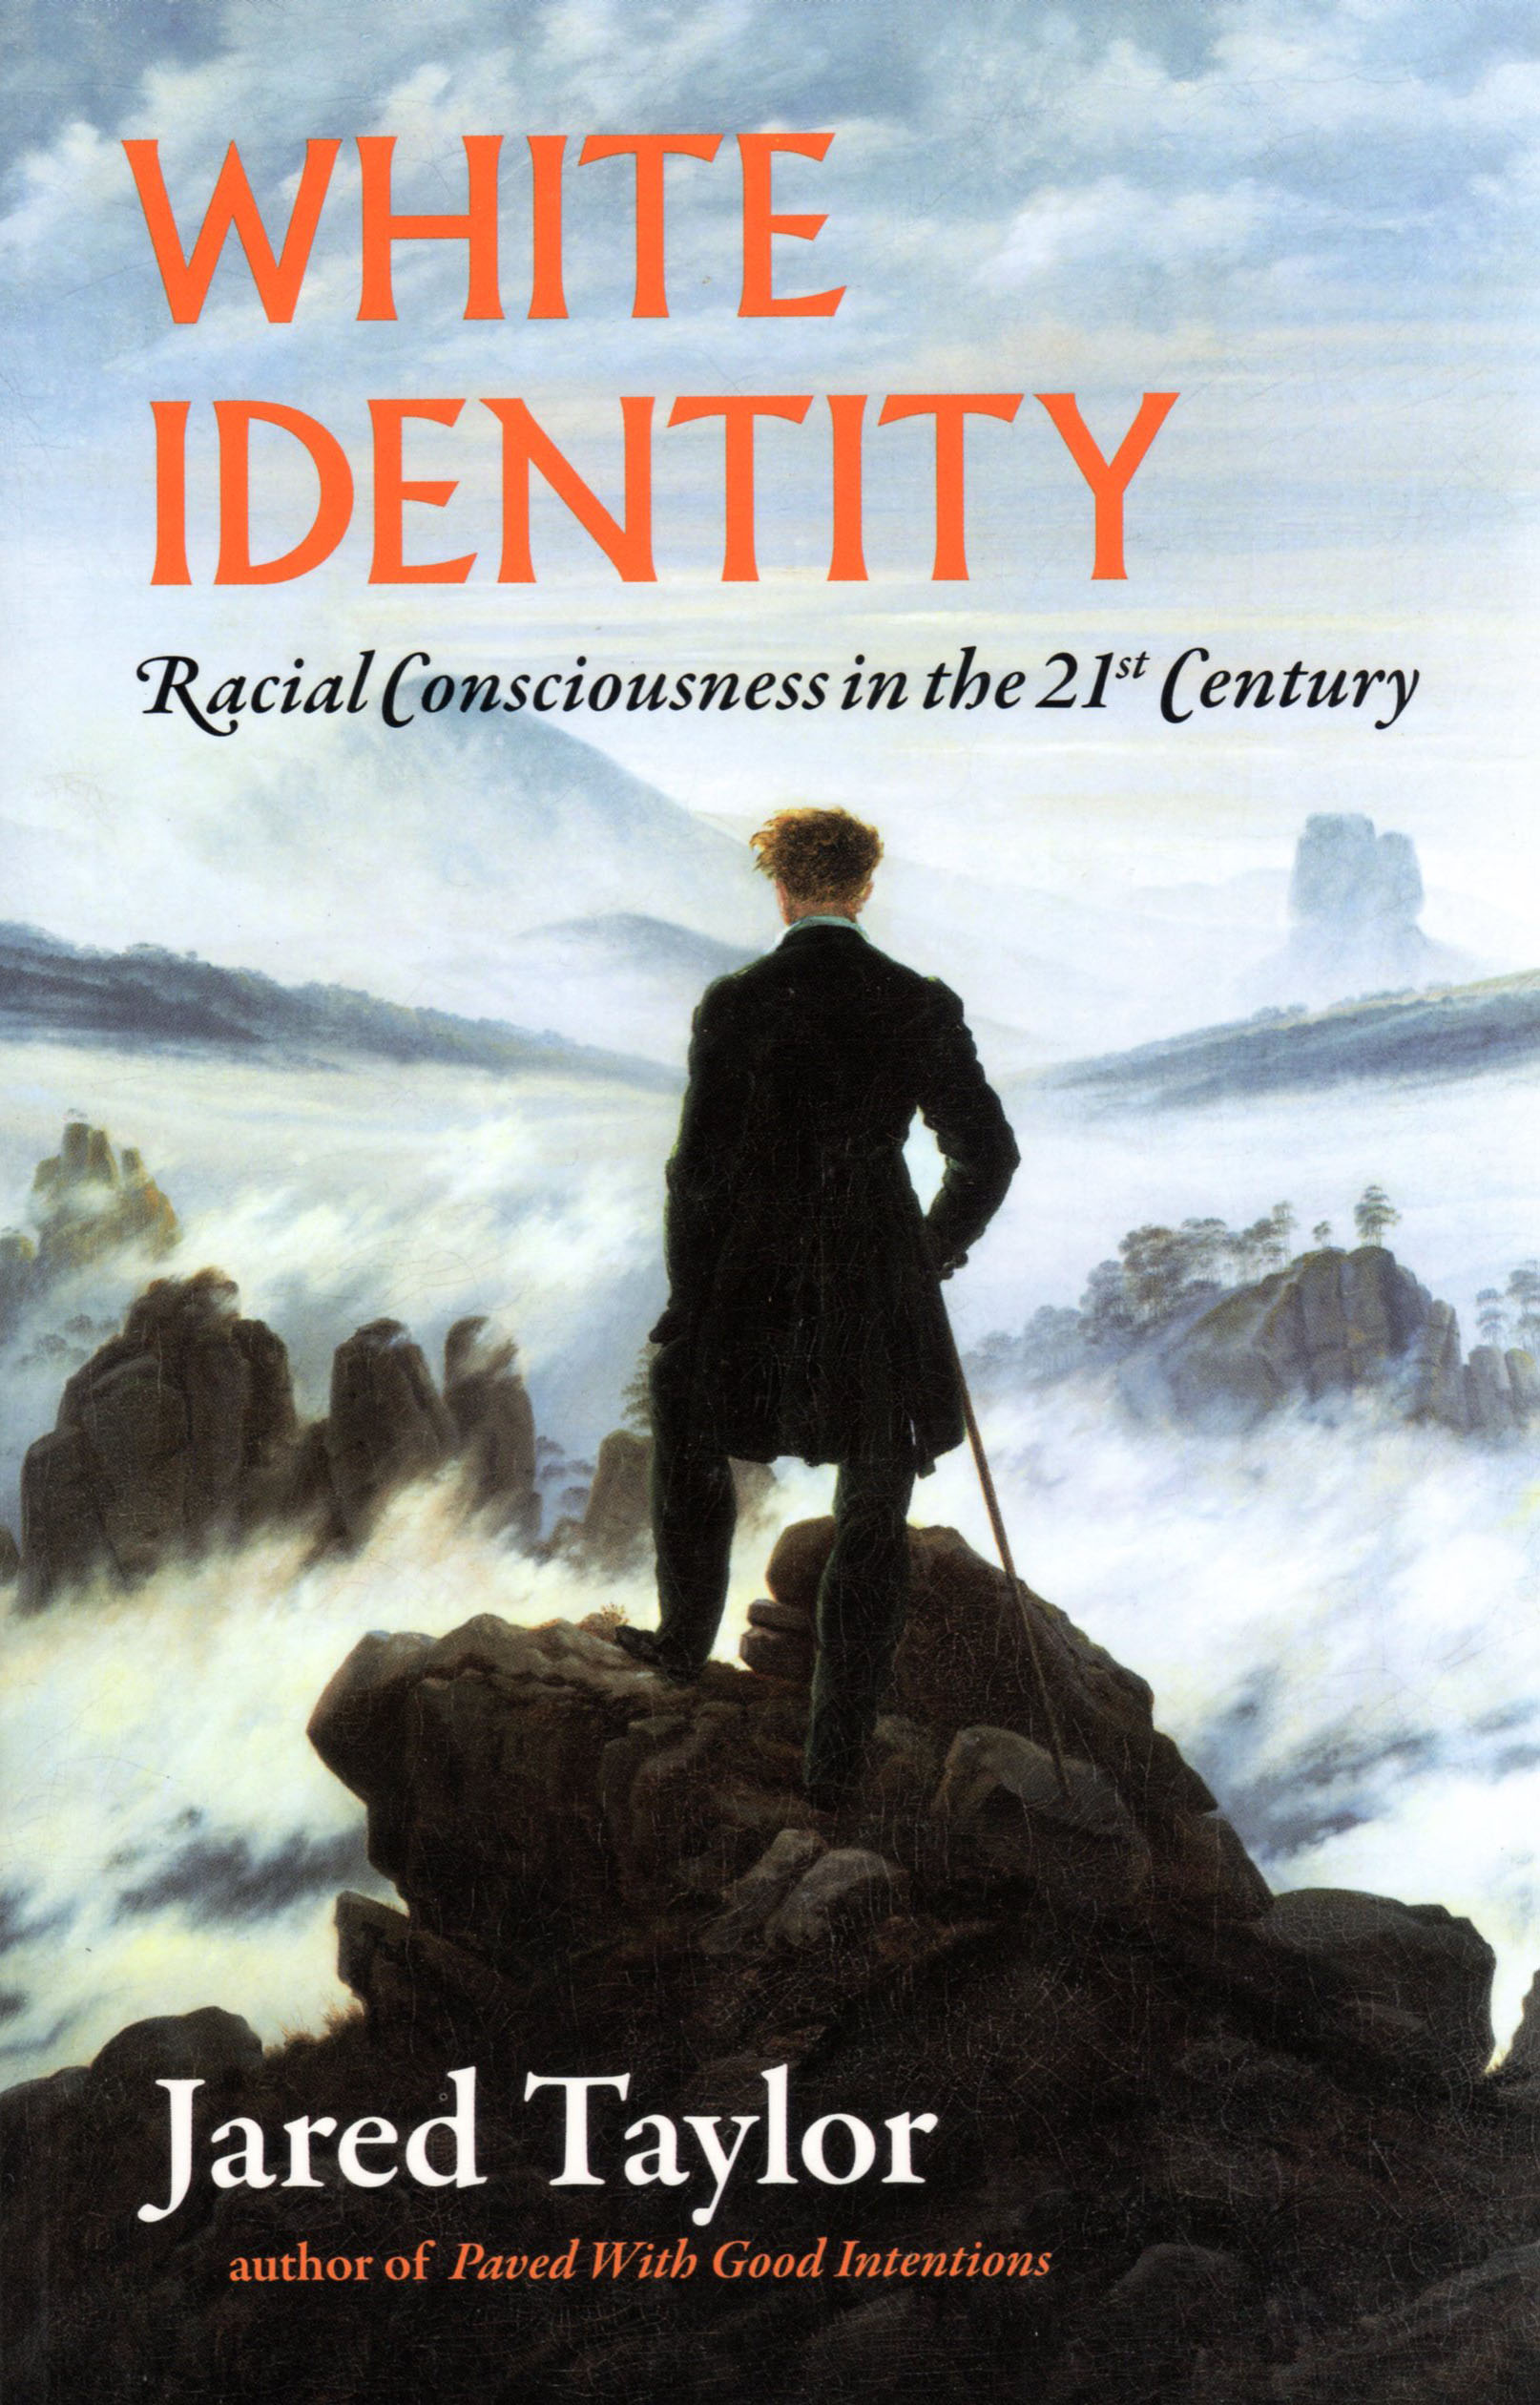 White Identity: Racial Consciousness in the 21st Century